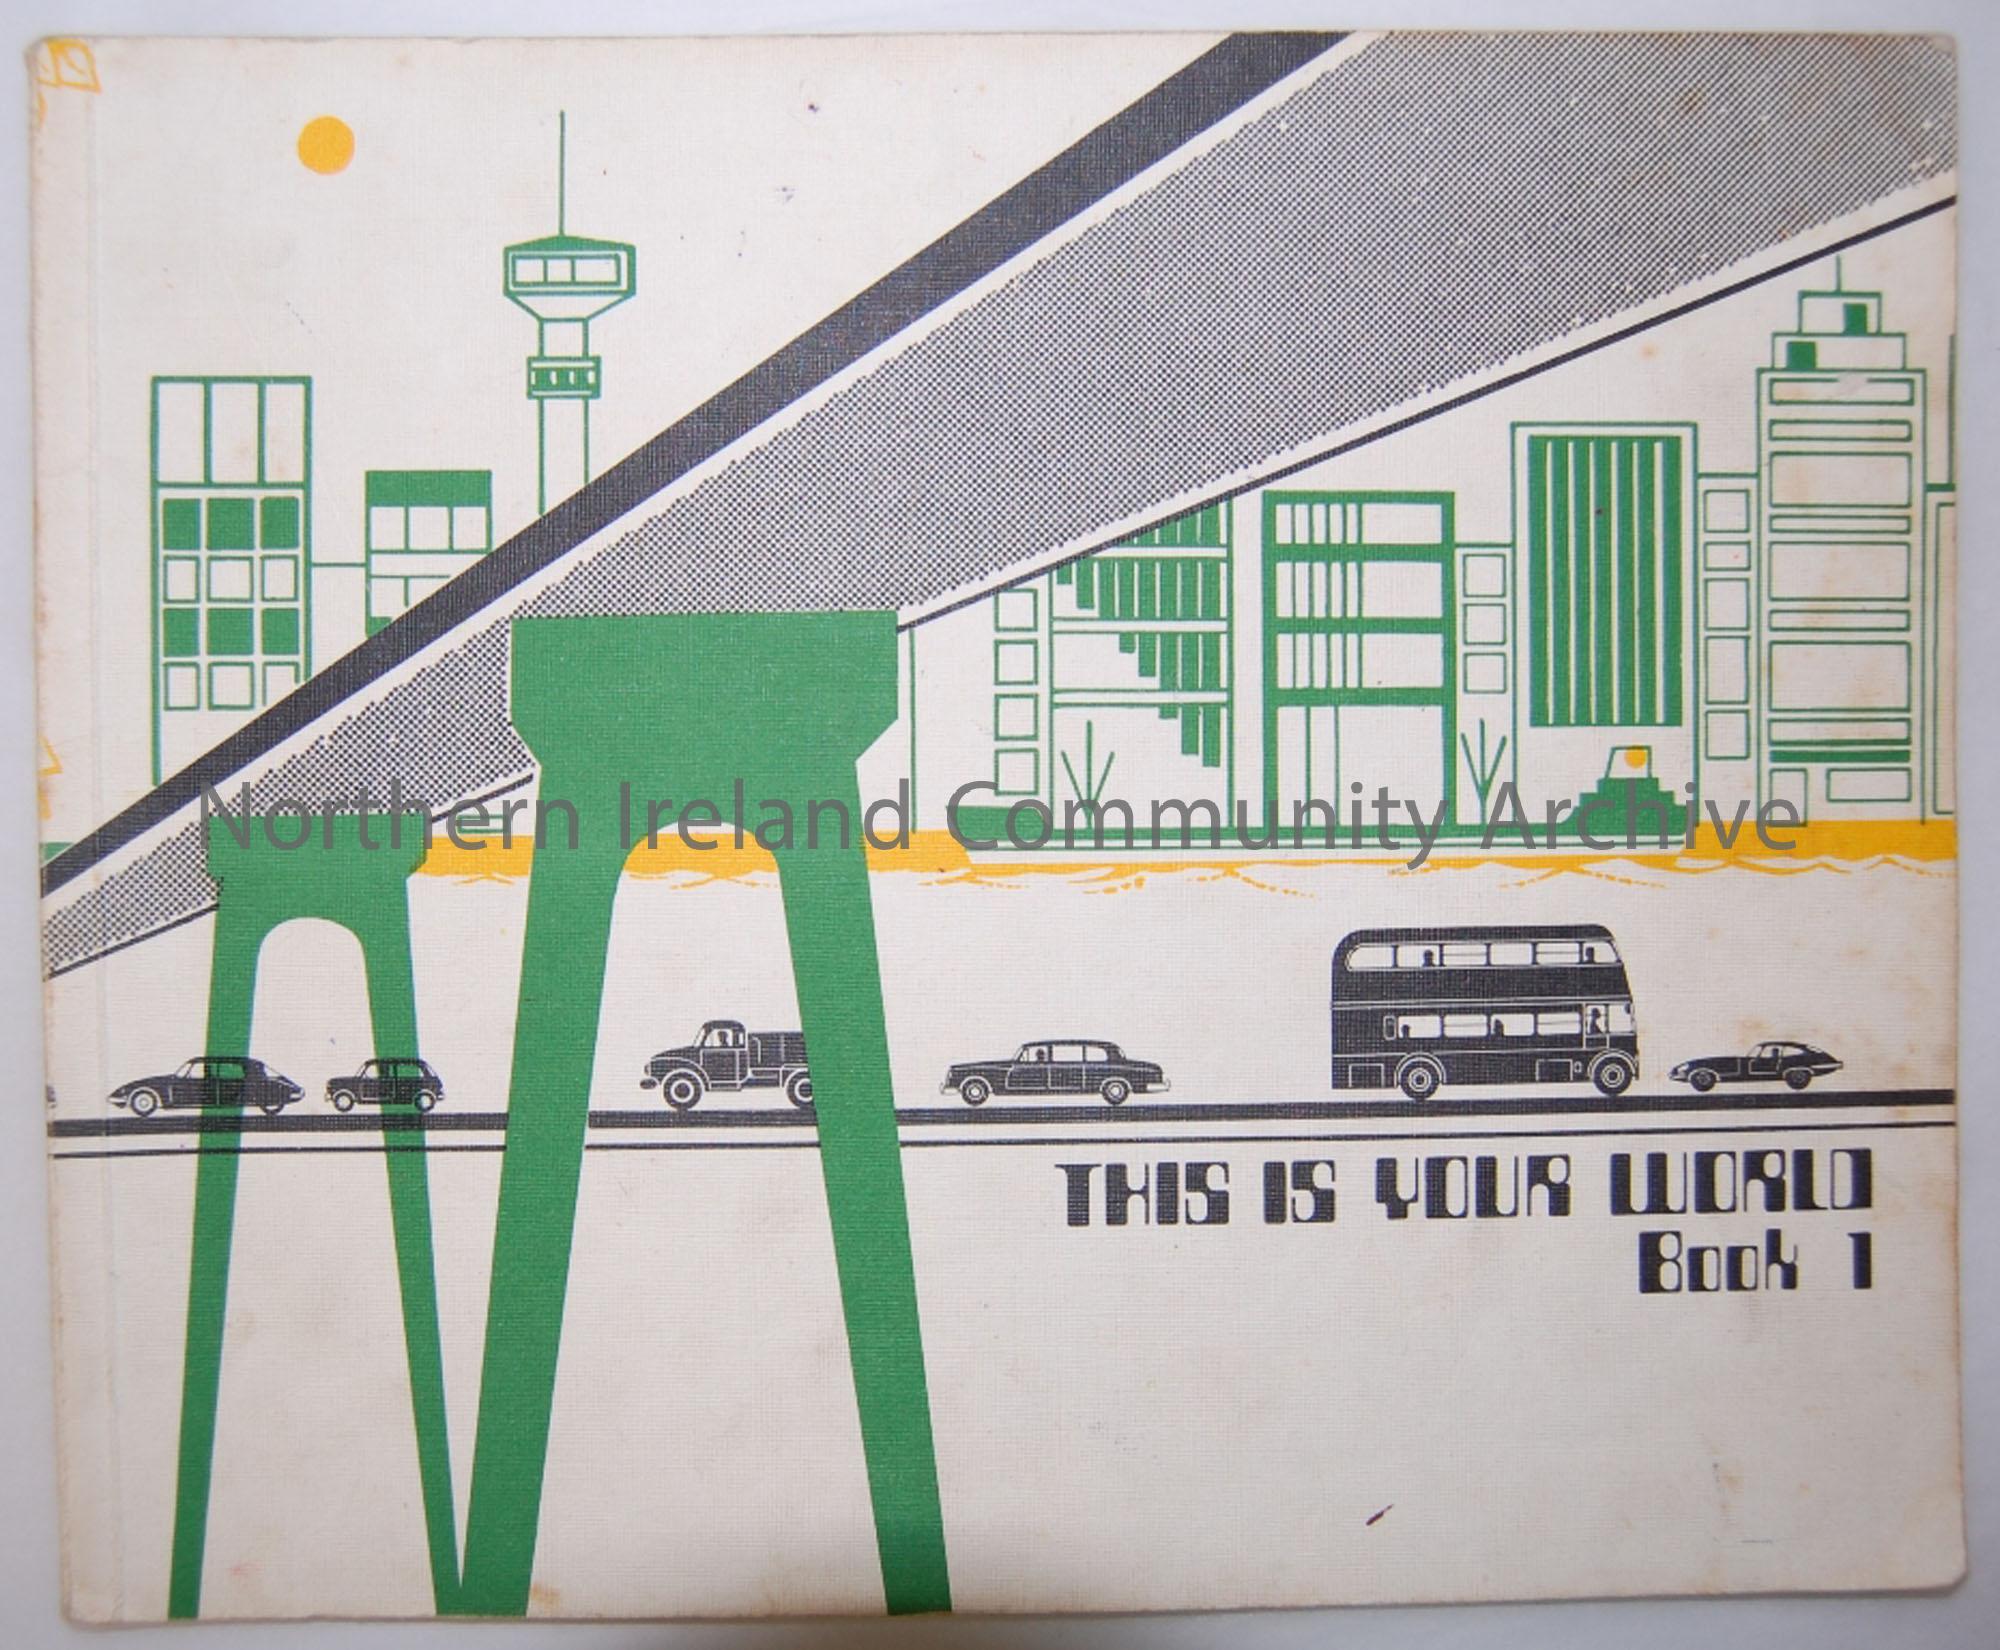 By Garner, 1970. White cover with illustration of bridge, city and cars in green, black and yellow